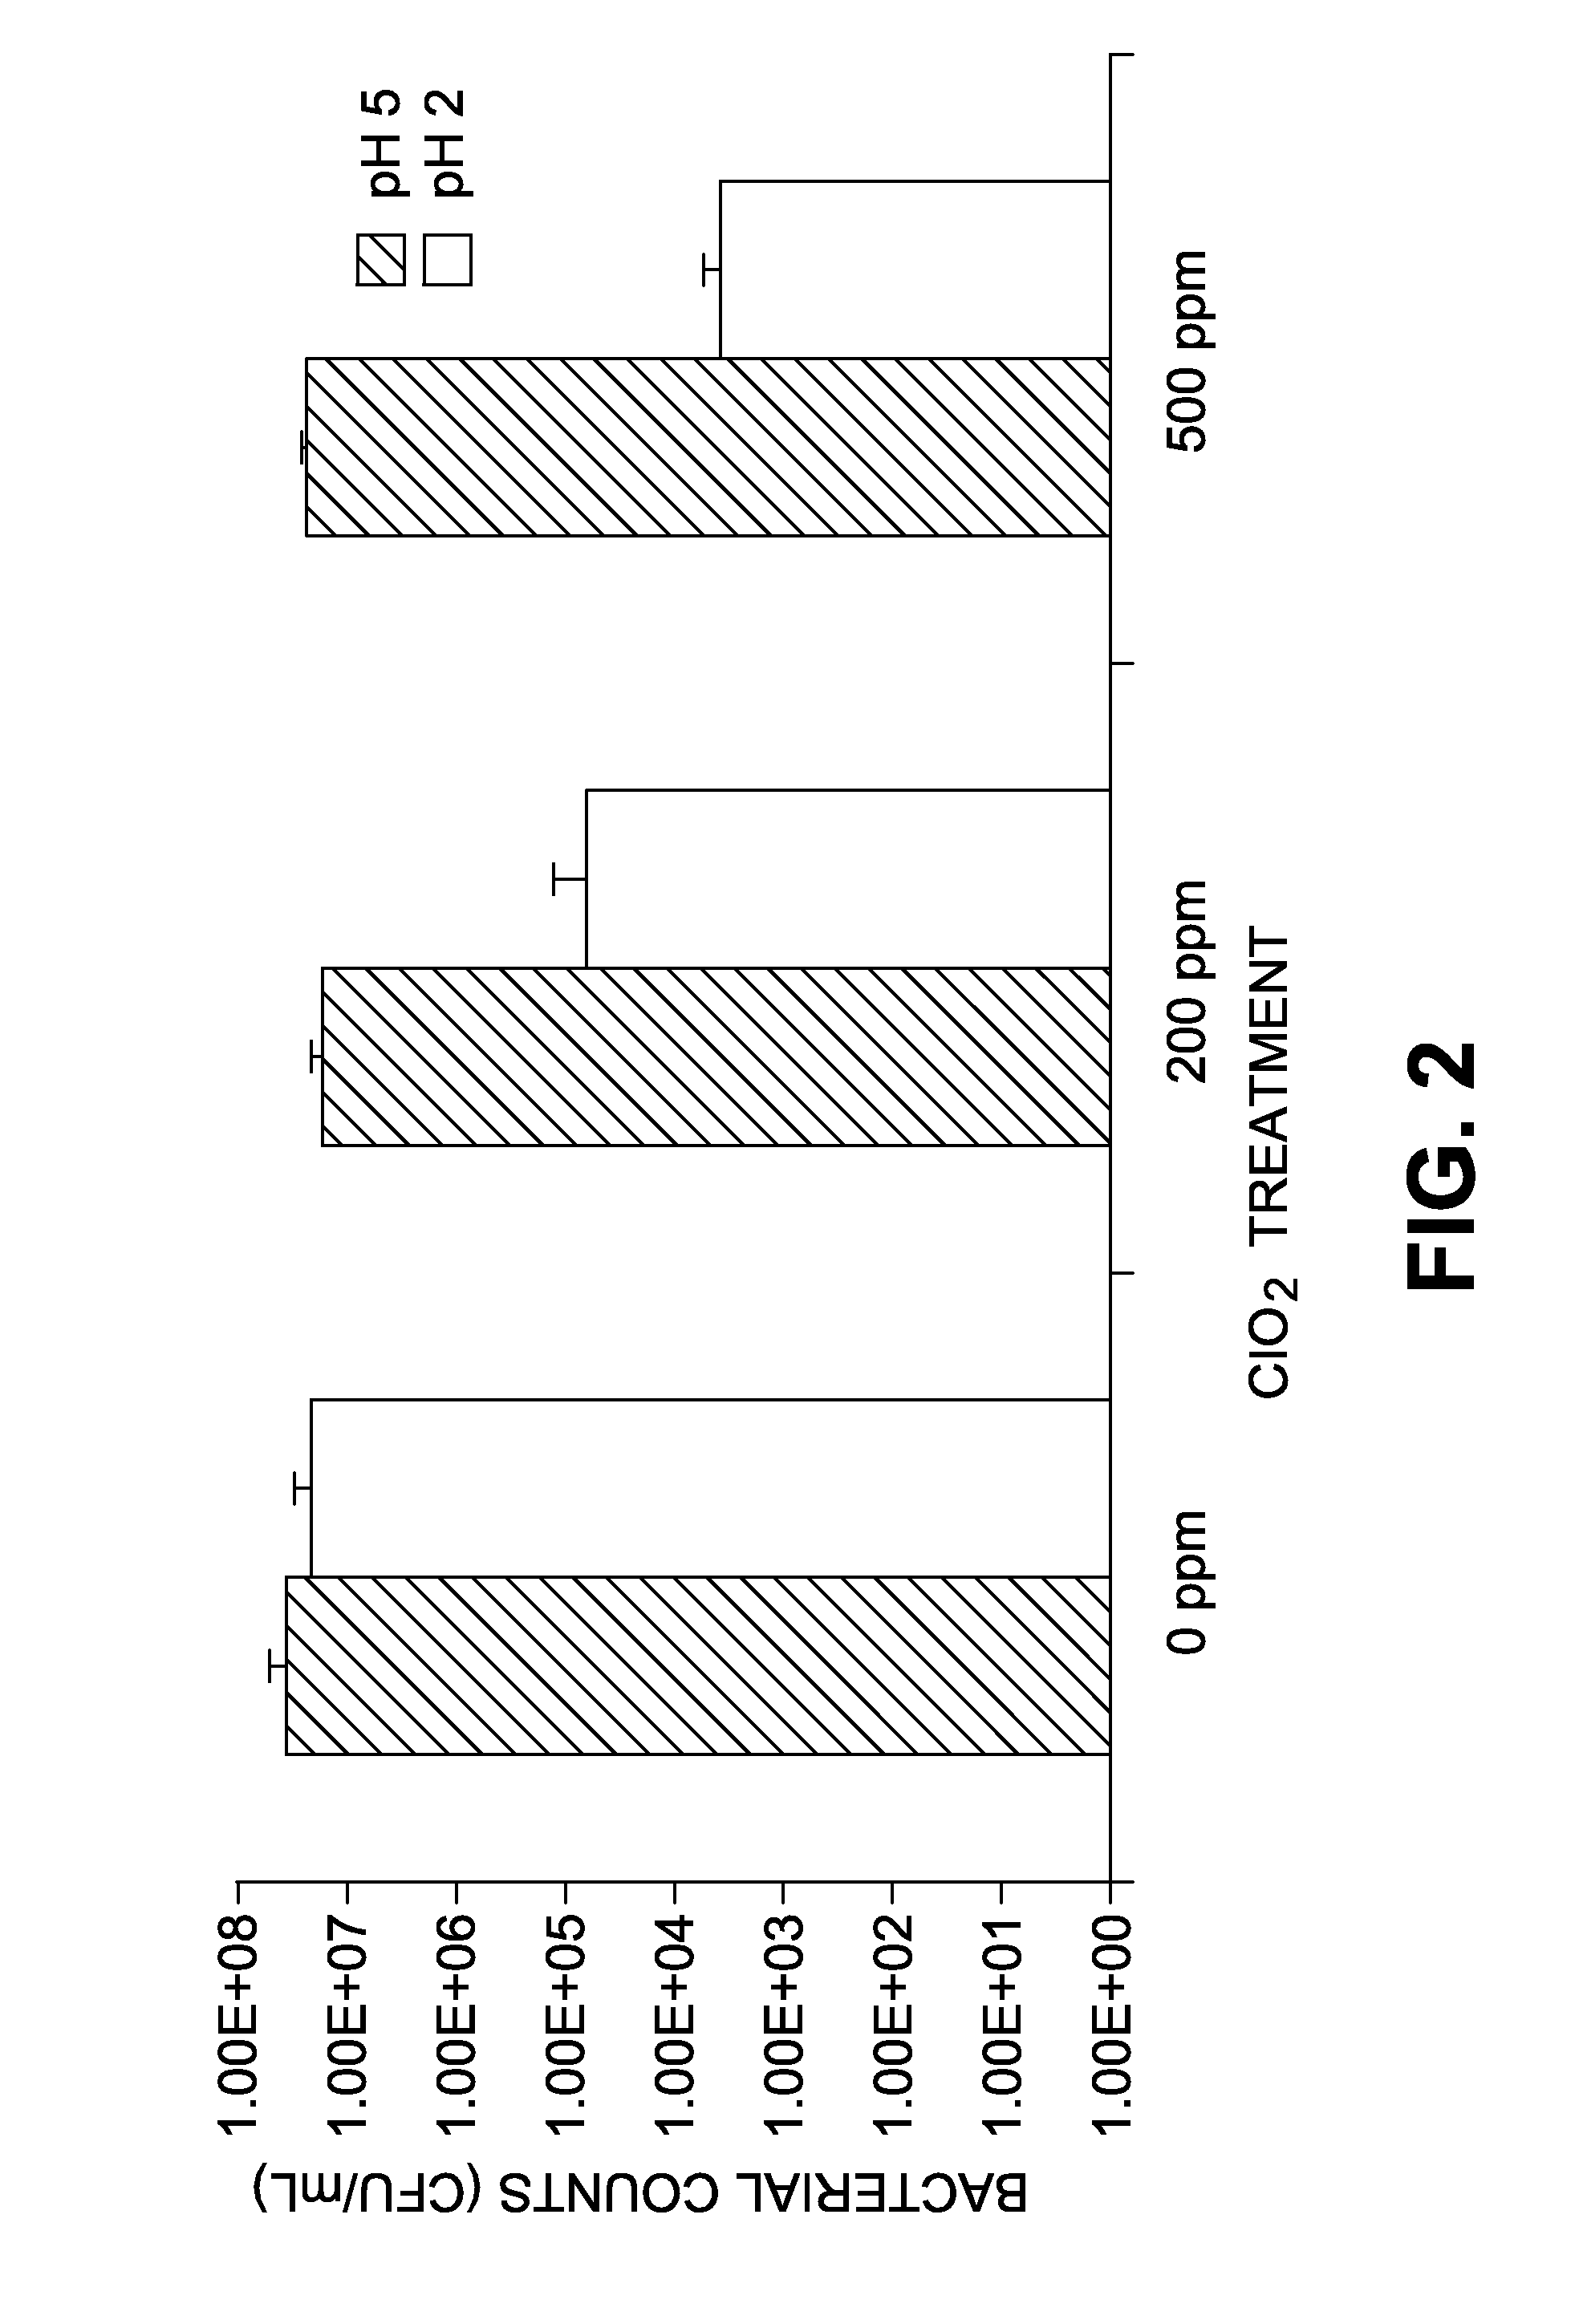 Method for the production of a fermentation product from a sugar hydrolysate